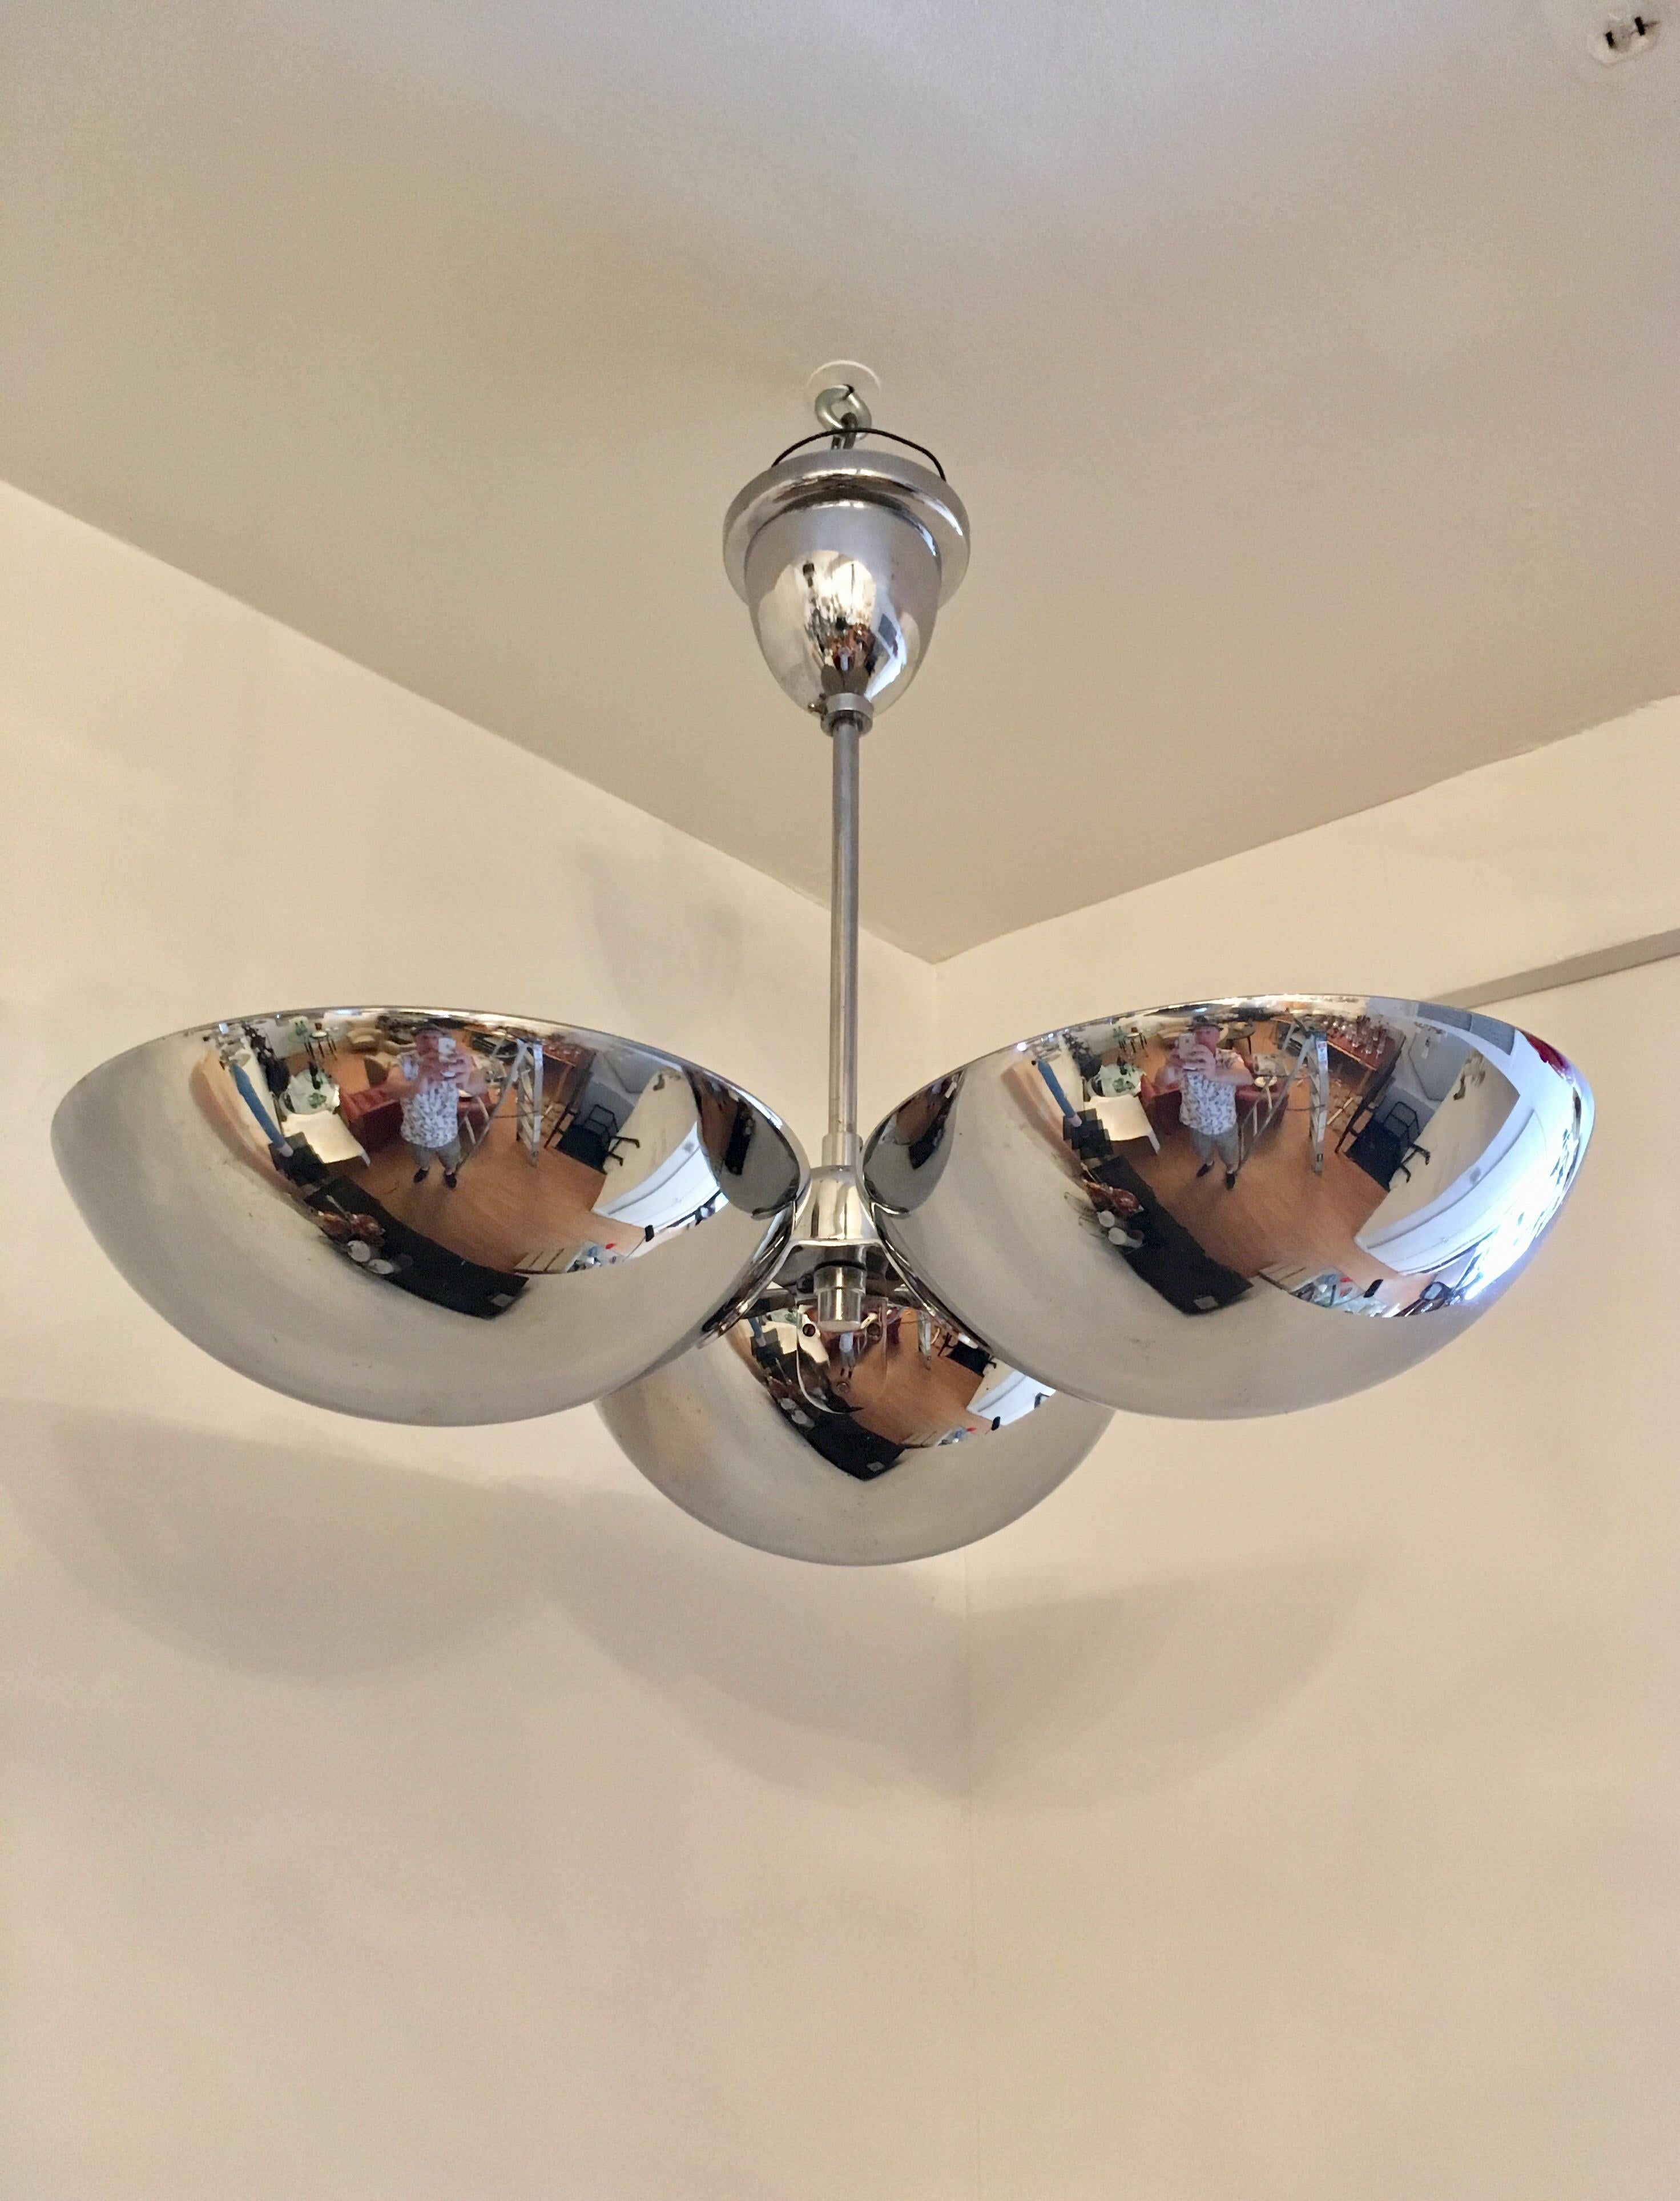 A great 1930s Bauhaus polished chrome flush ceiling light or hanging pendant. The fixture is composed of three half domes each with a porcelain 120w light socket. All rewired. Ceiling pole can be shortened or lengthened.